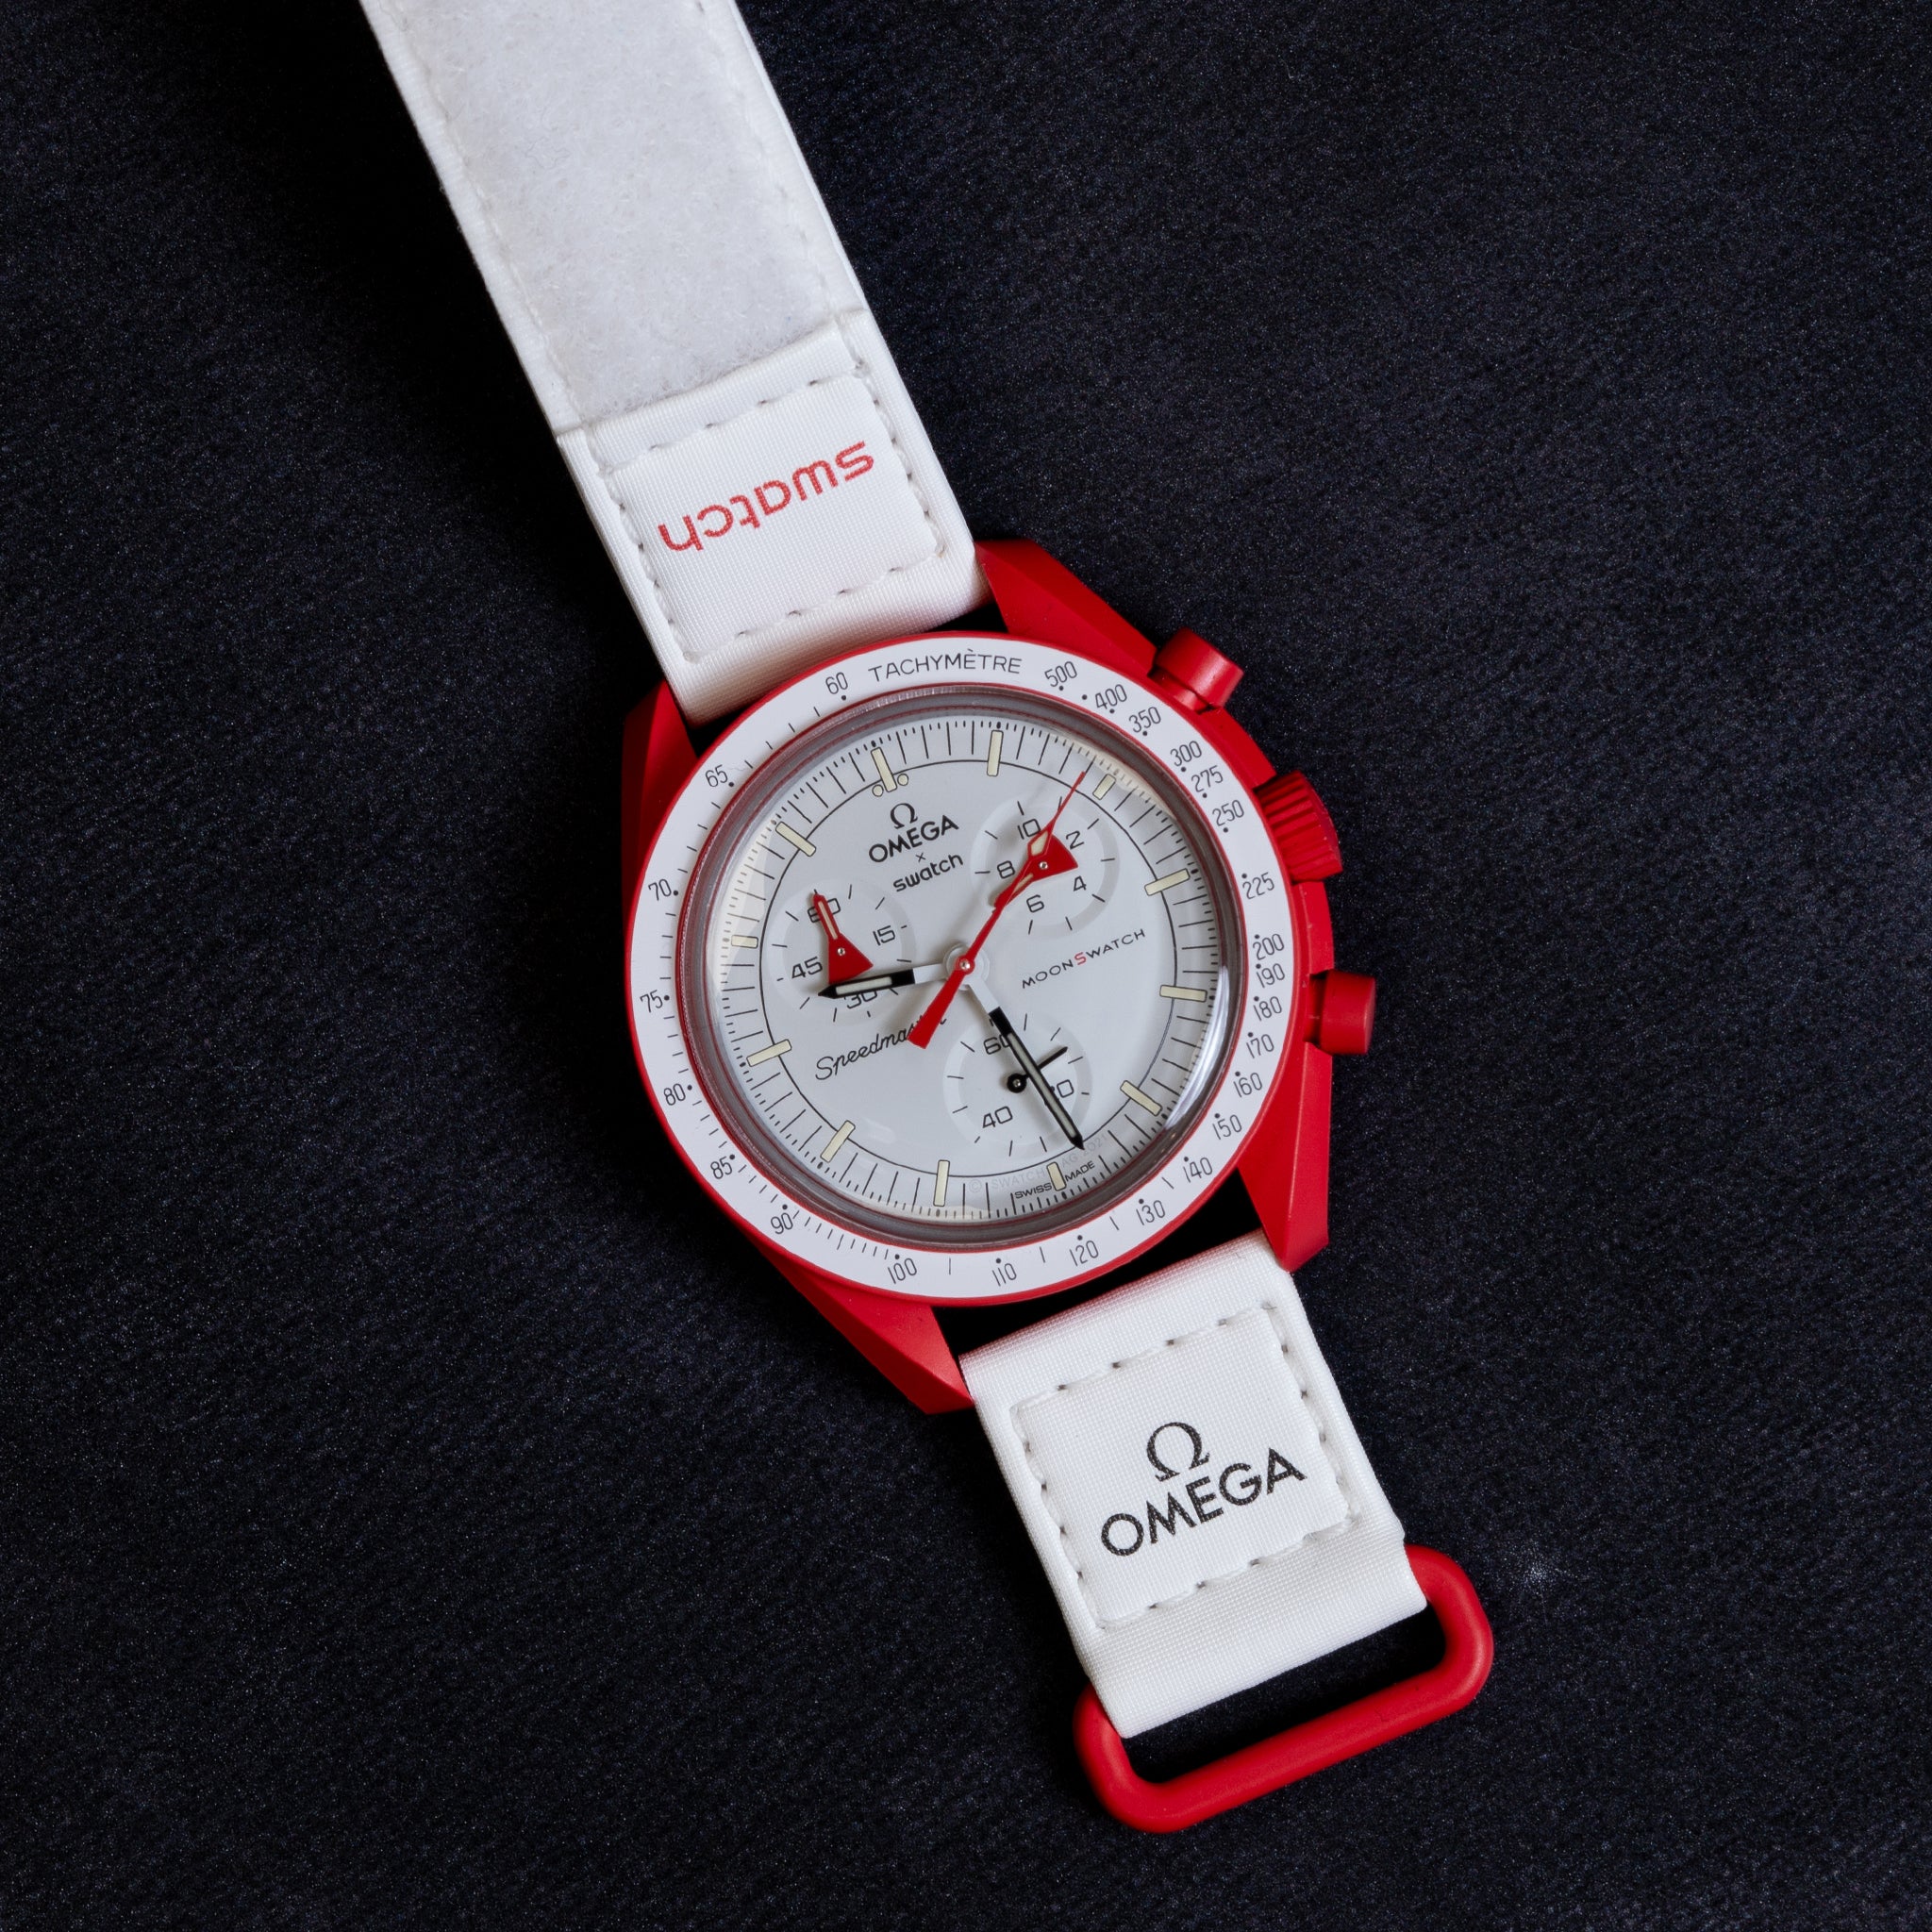 Omega x Swatch "Mission to Mars"